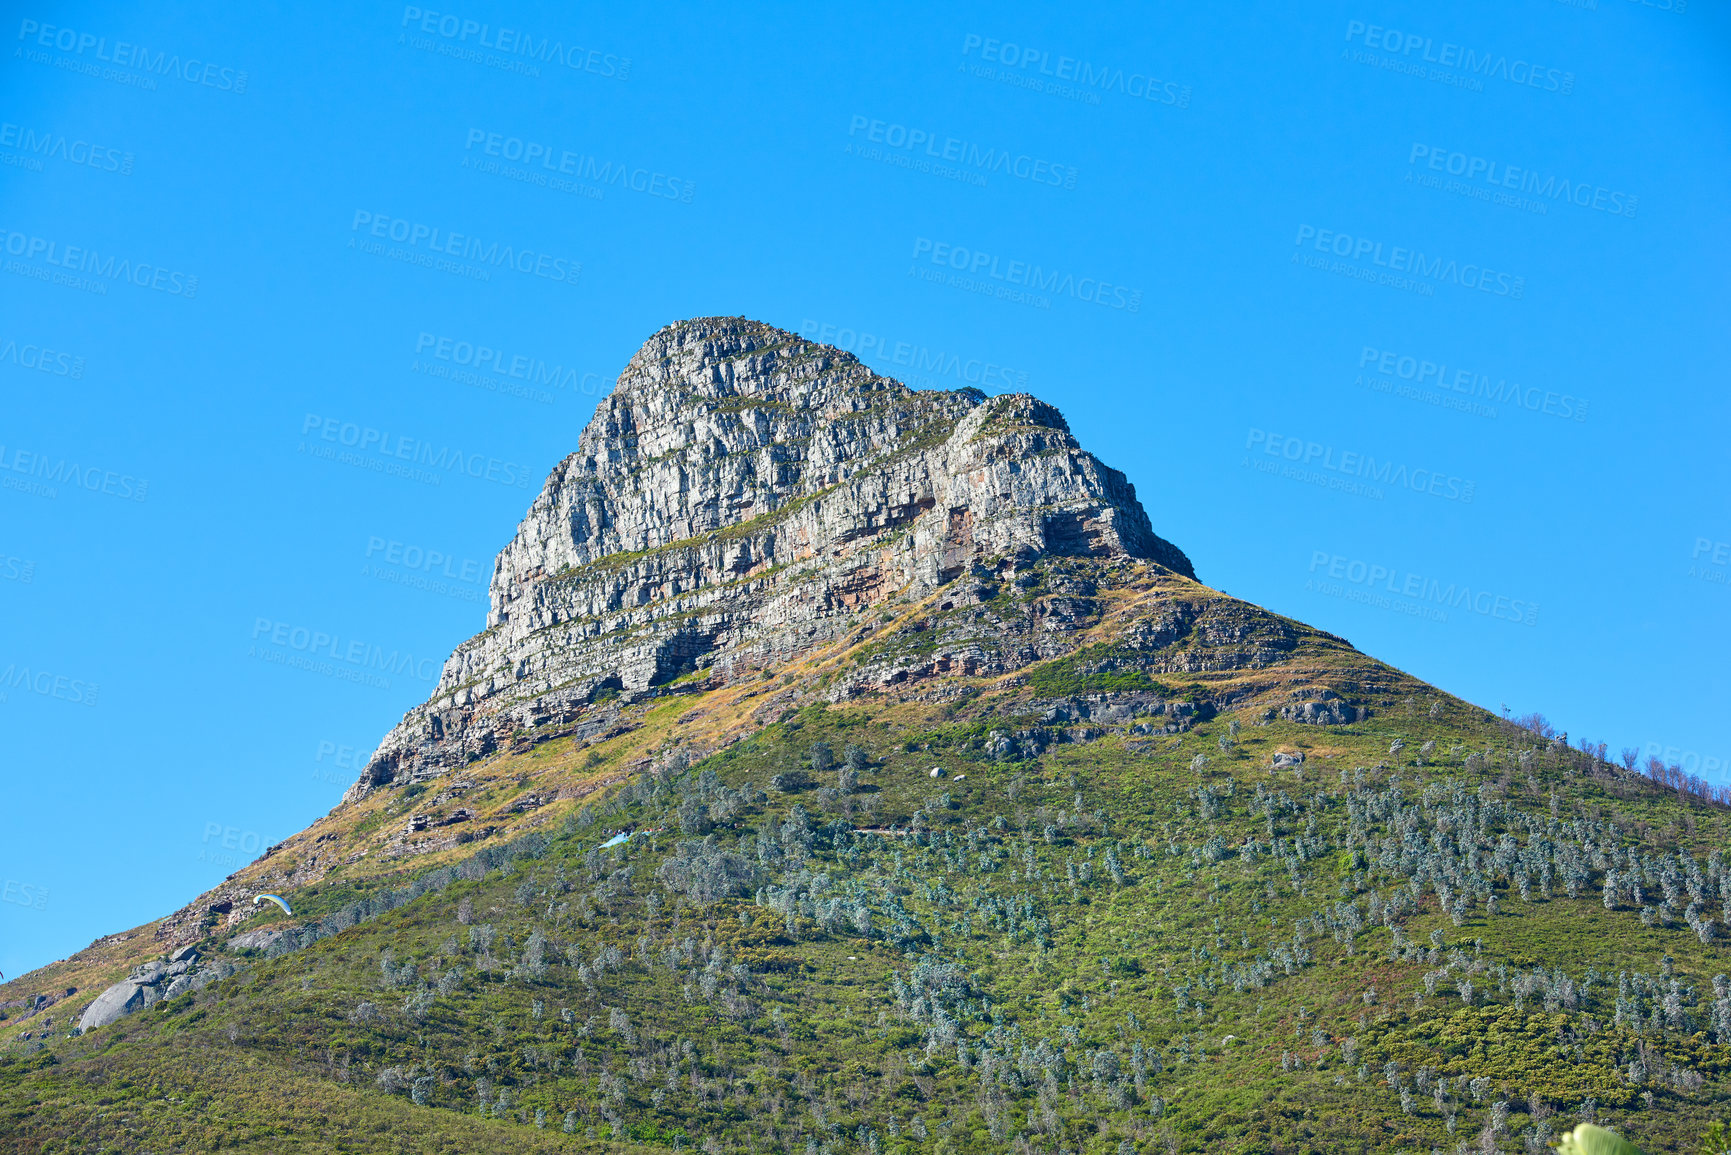 Buy stock photo Lions Head mountain with a blue sky and copy space. Beautiful below view of a rocky mountain peak covered in lots of lush green vegetation at a popular tourism destination in Cape Town, South Africa